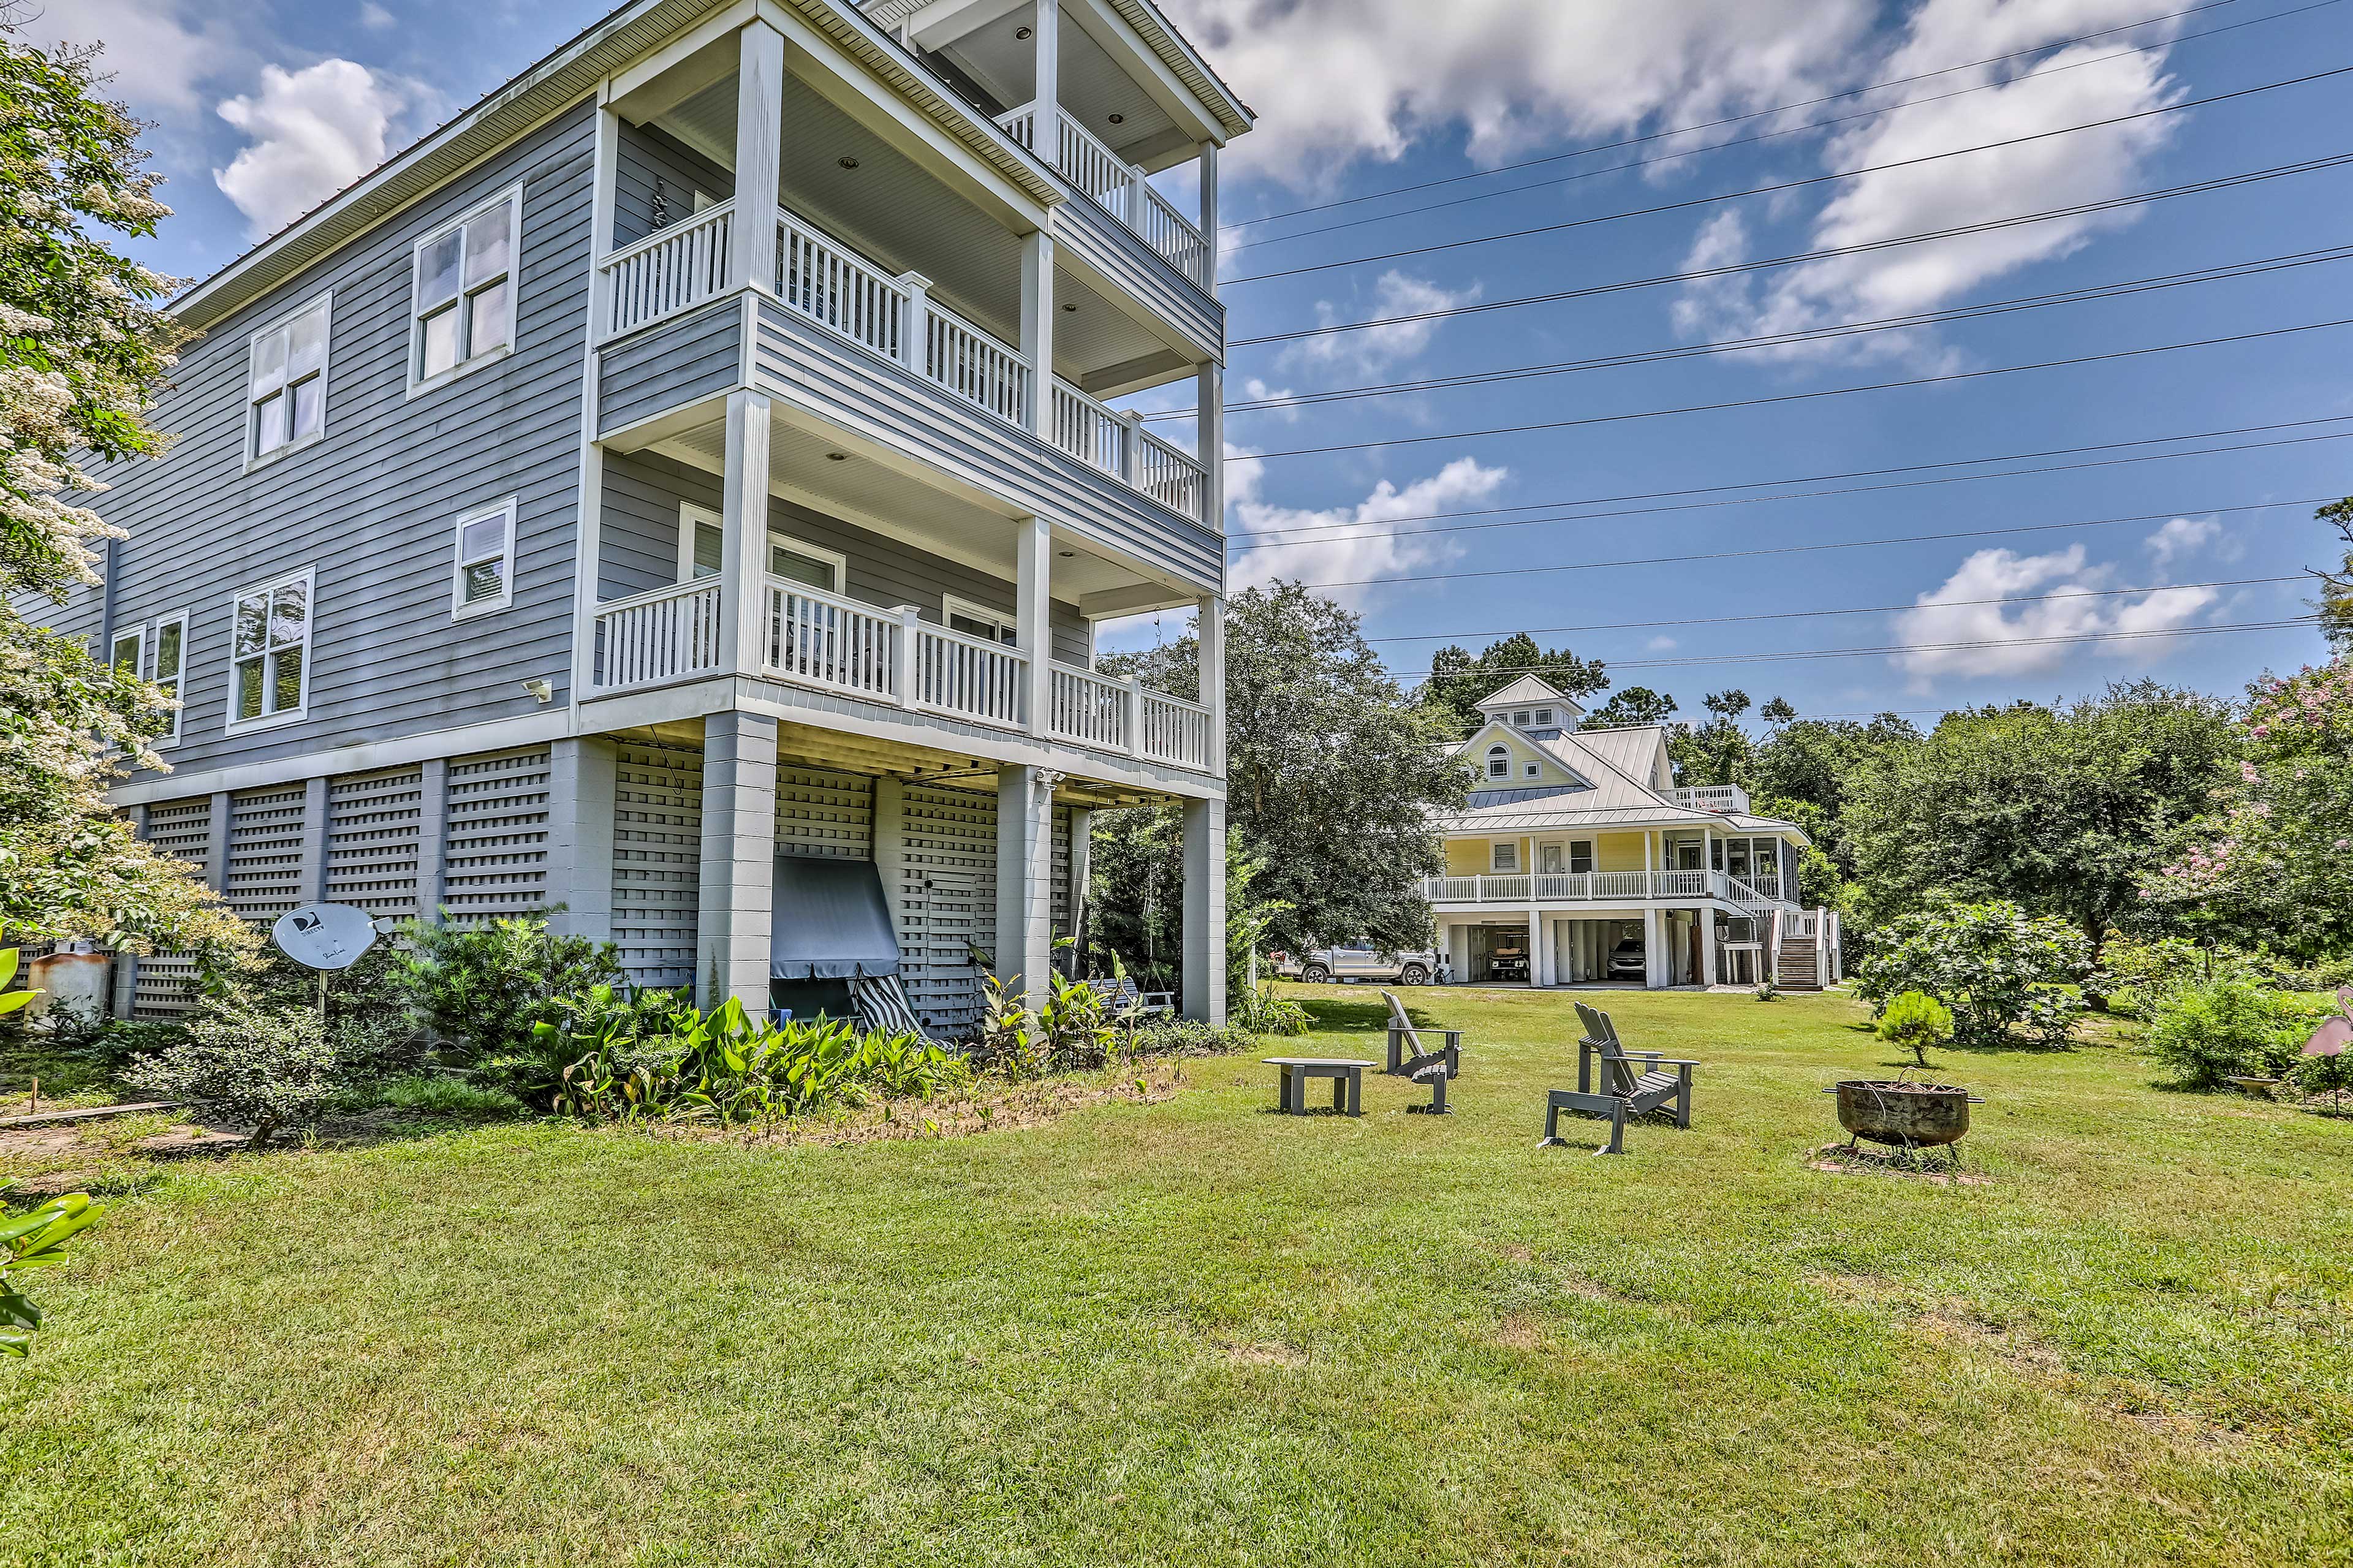 This 3-story vacation rental house is group friendly!